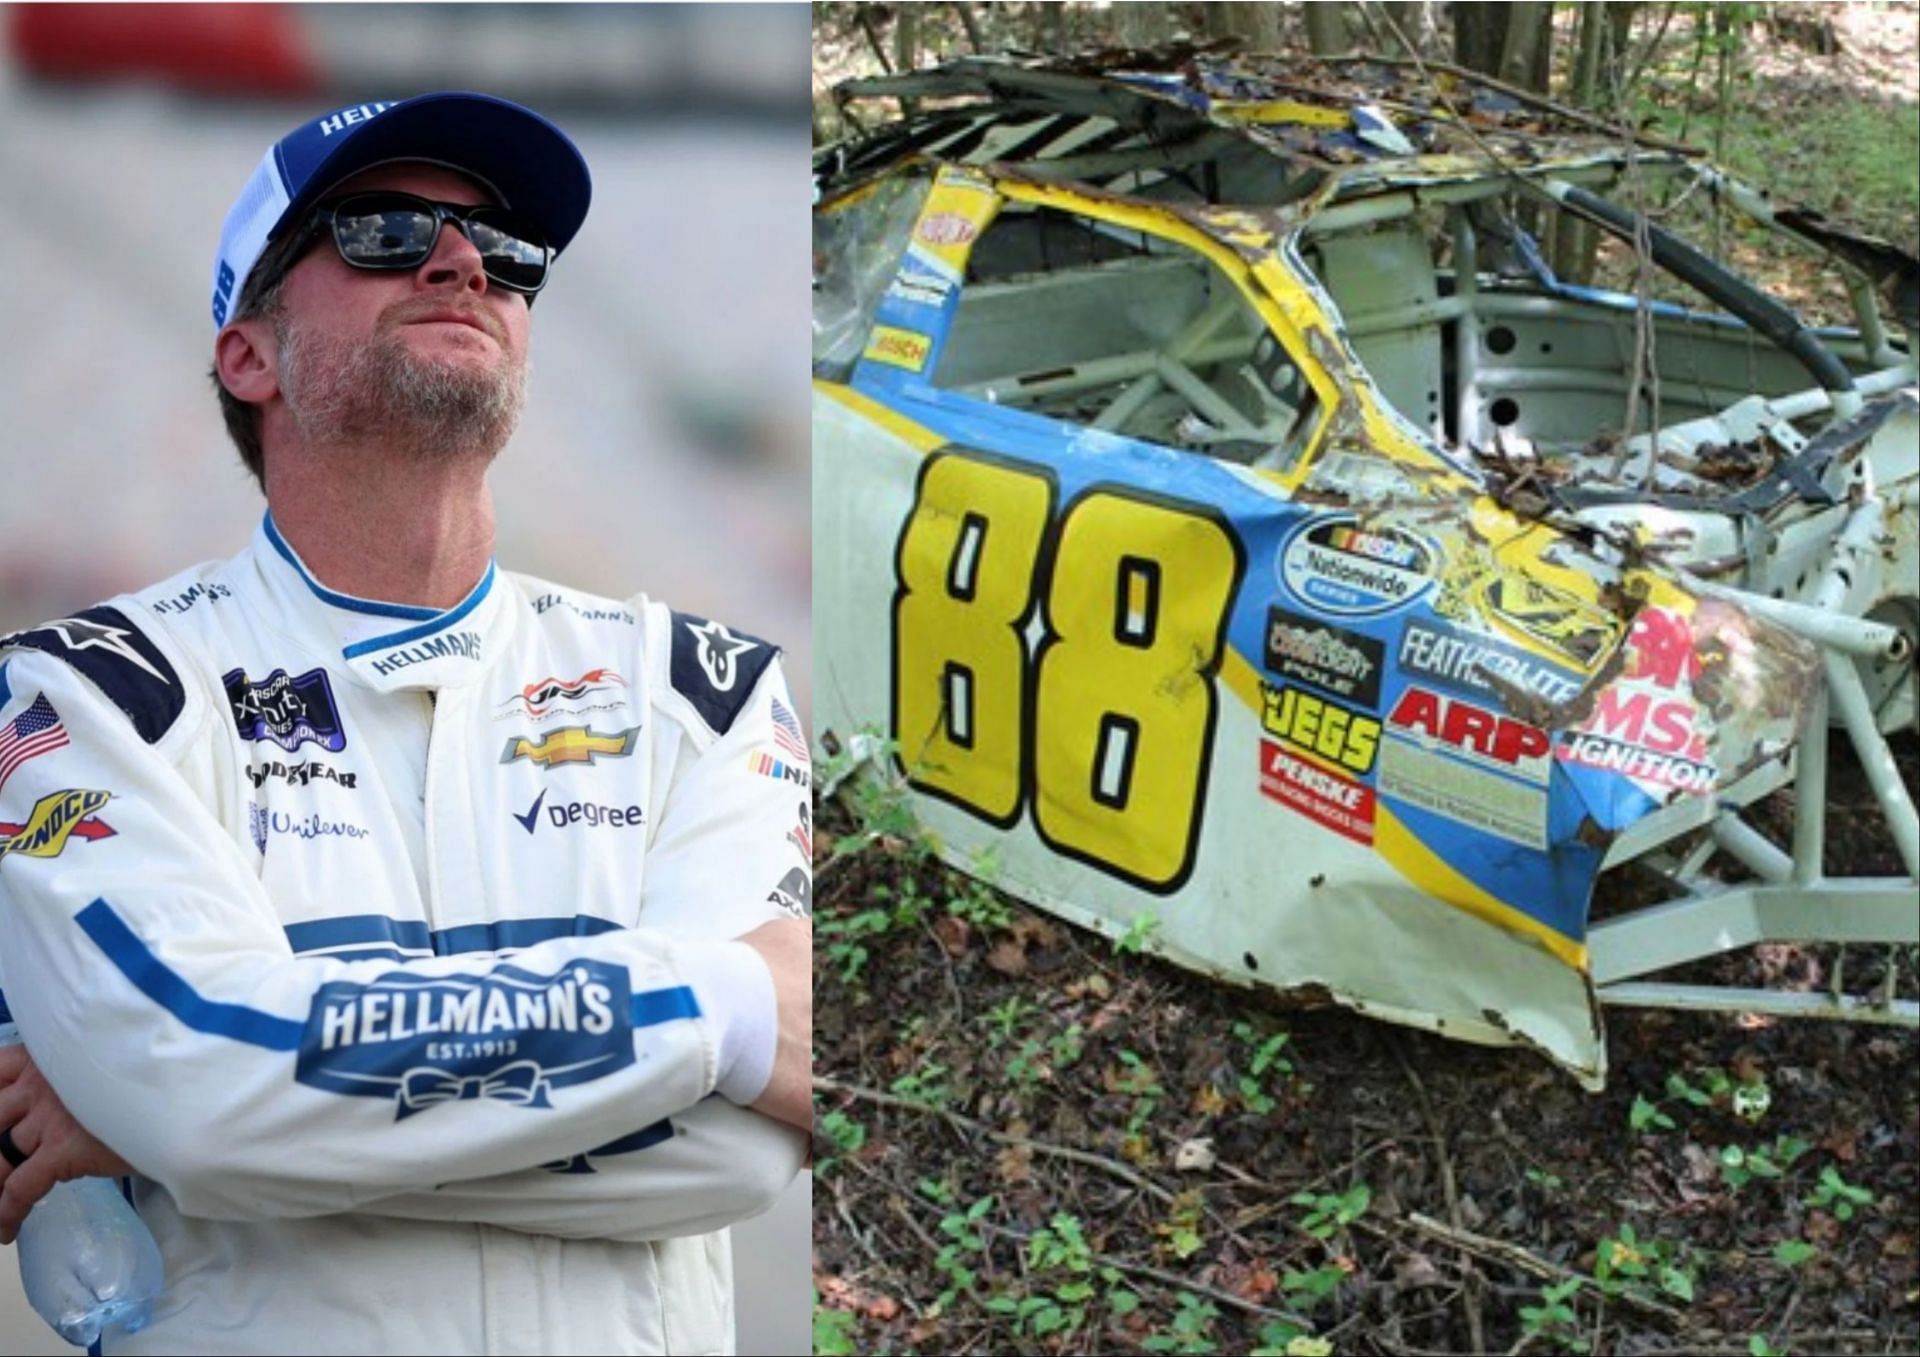 Dale Earnhardt jr and his #88 Chevy (Image via Getty and DaleJr.com respectively)